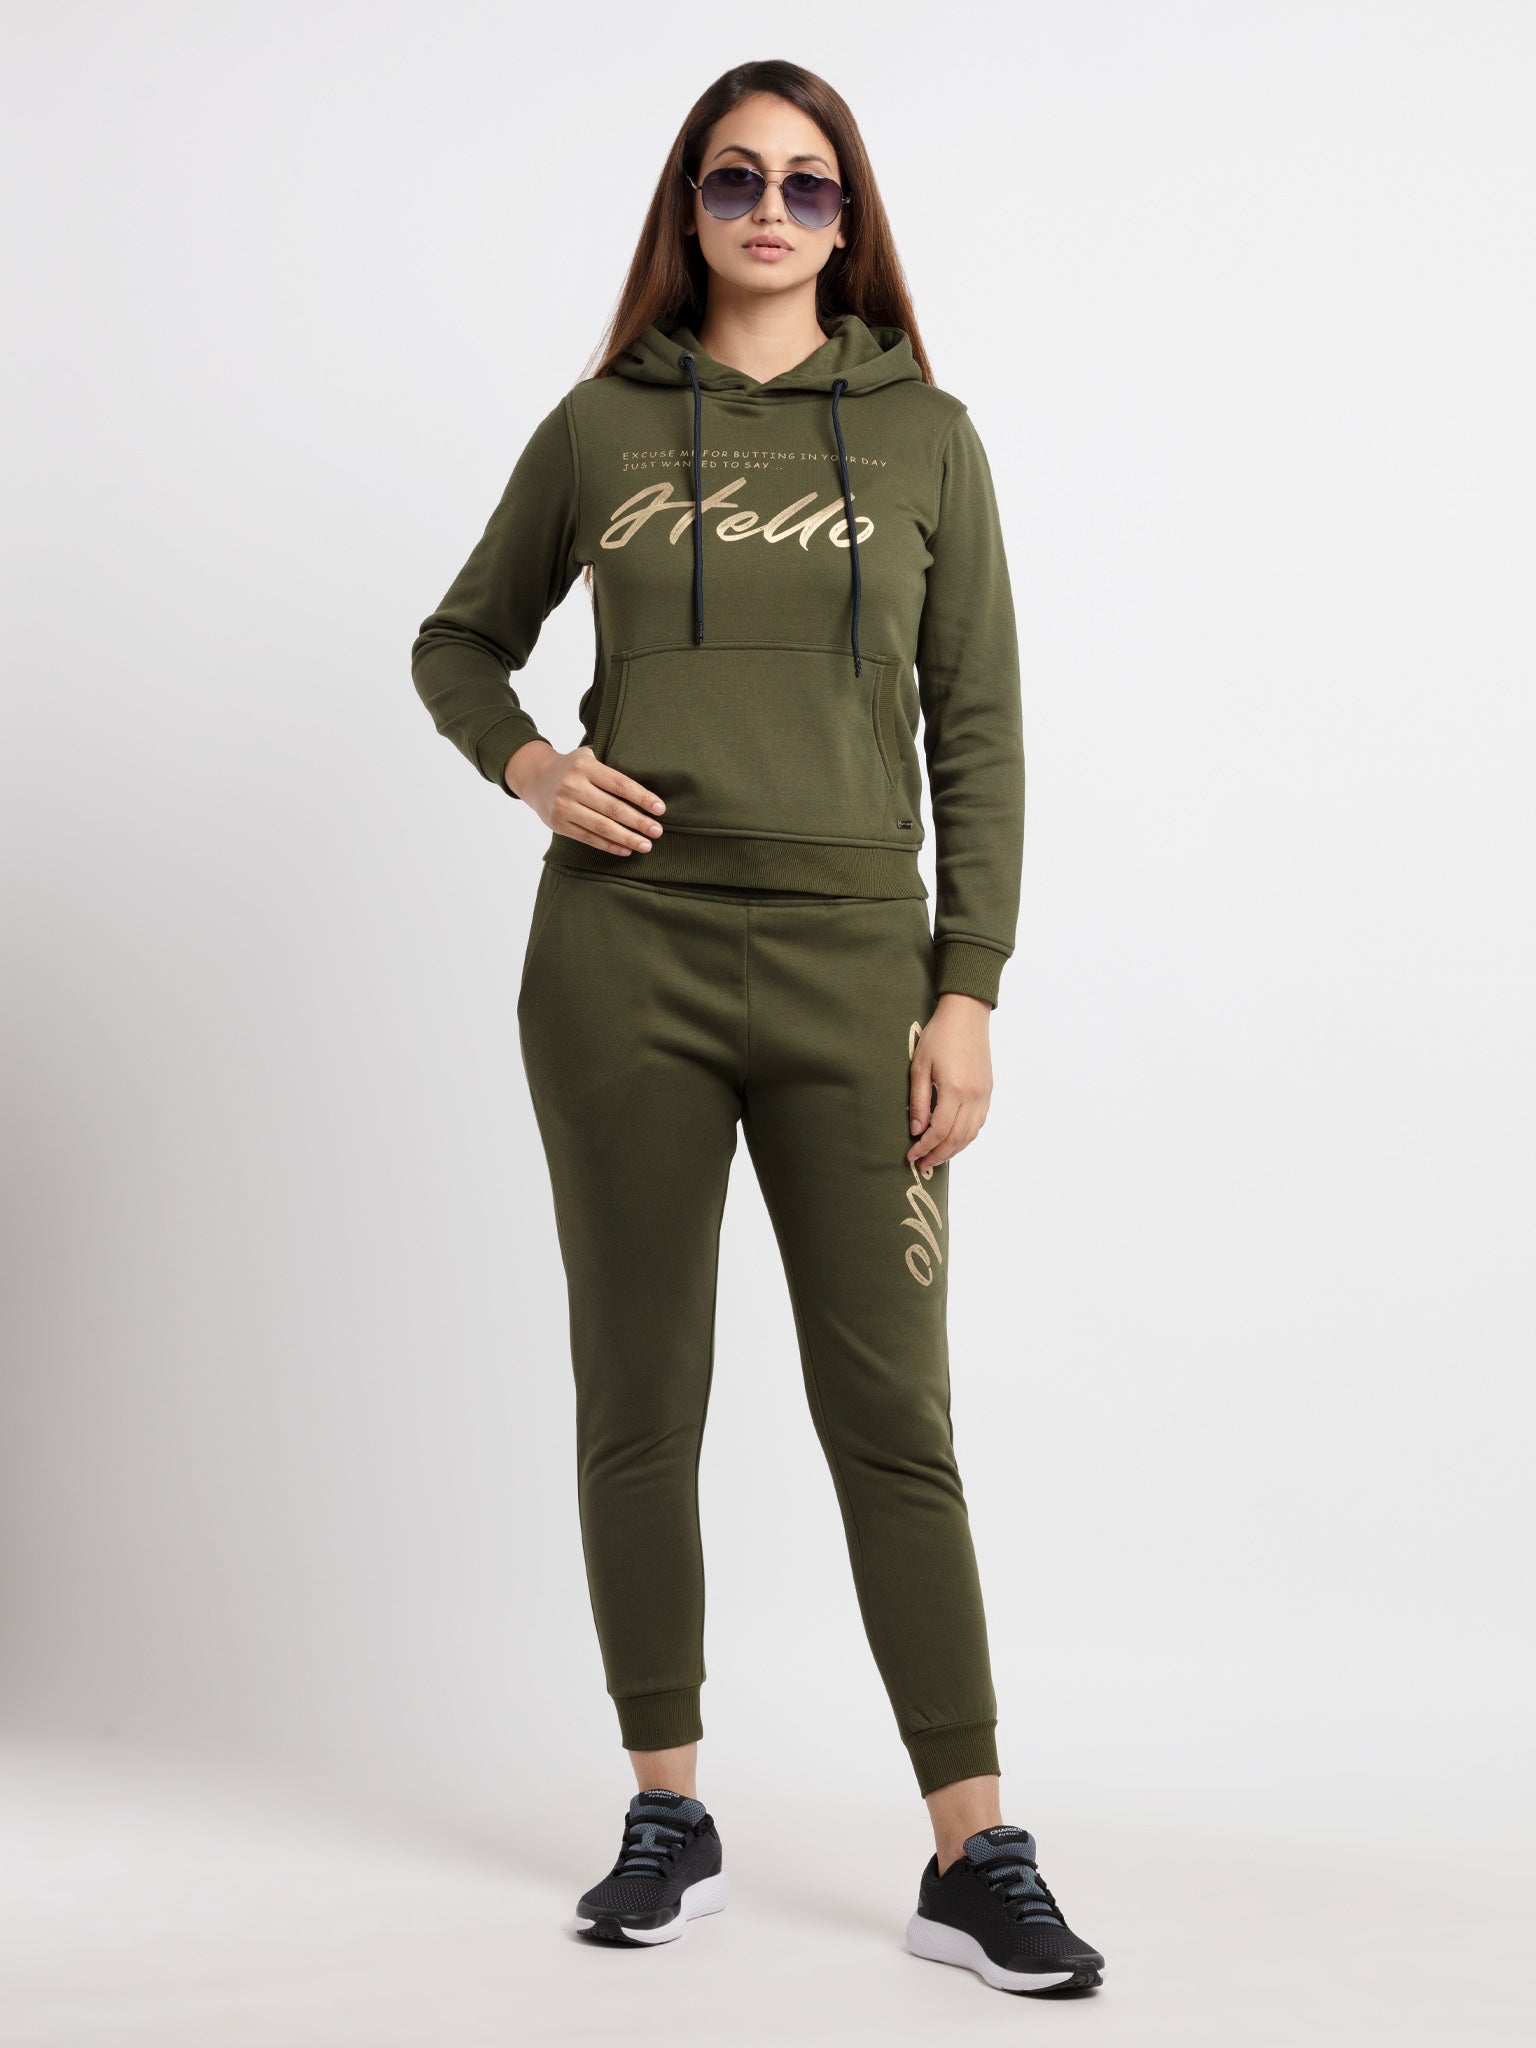 Women's Track Pants - Tracksuits & Trackies